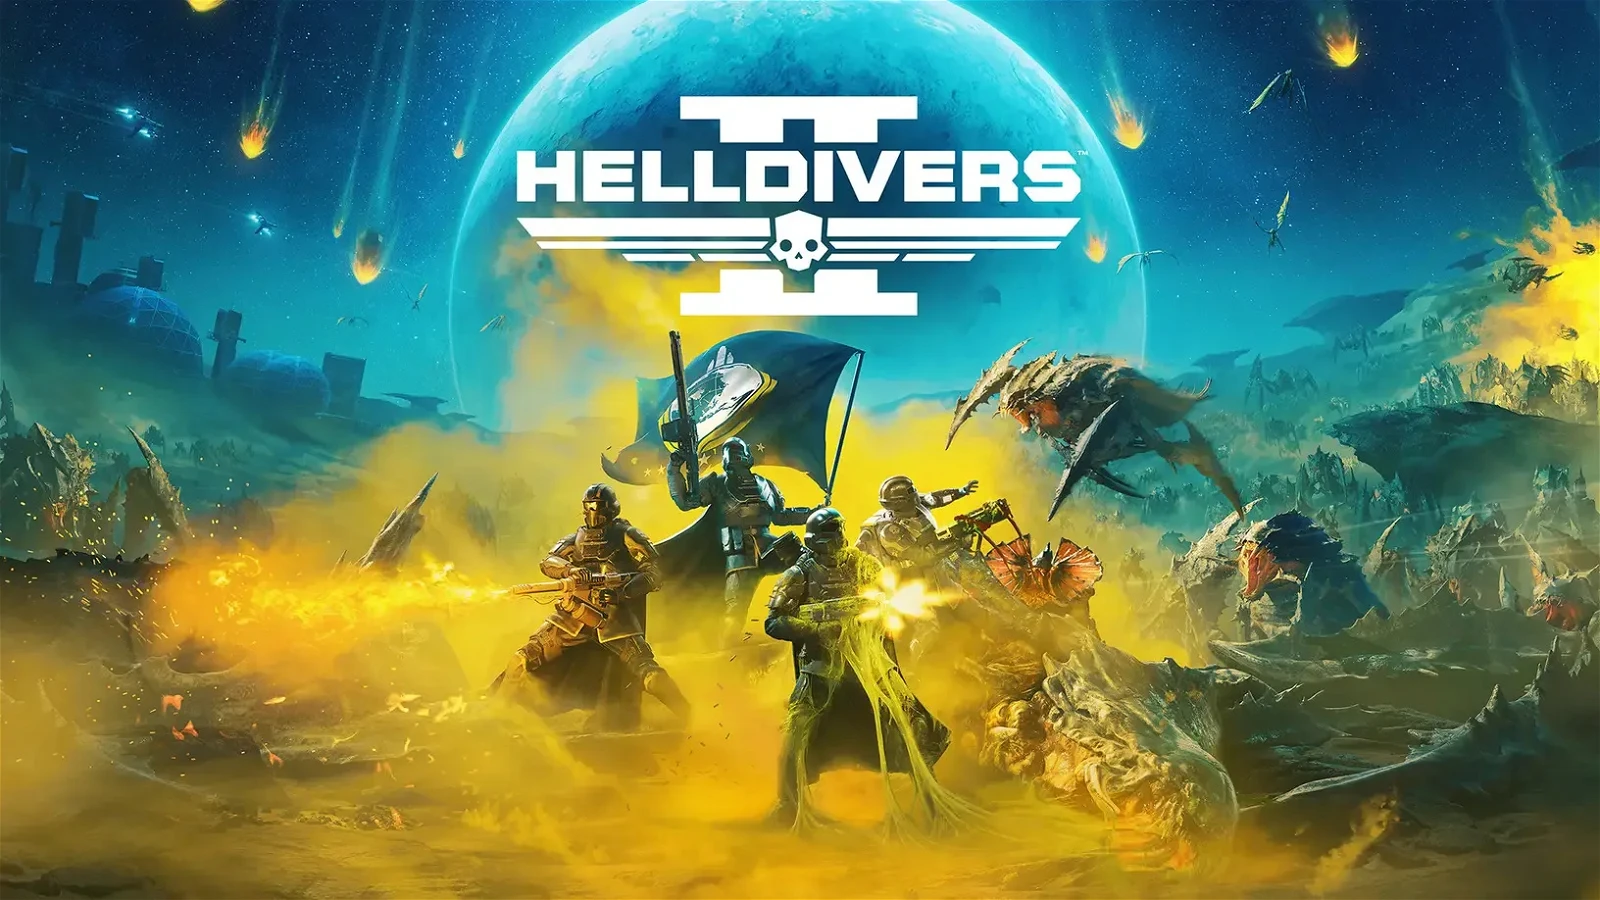 HellDivers 2 title image 